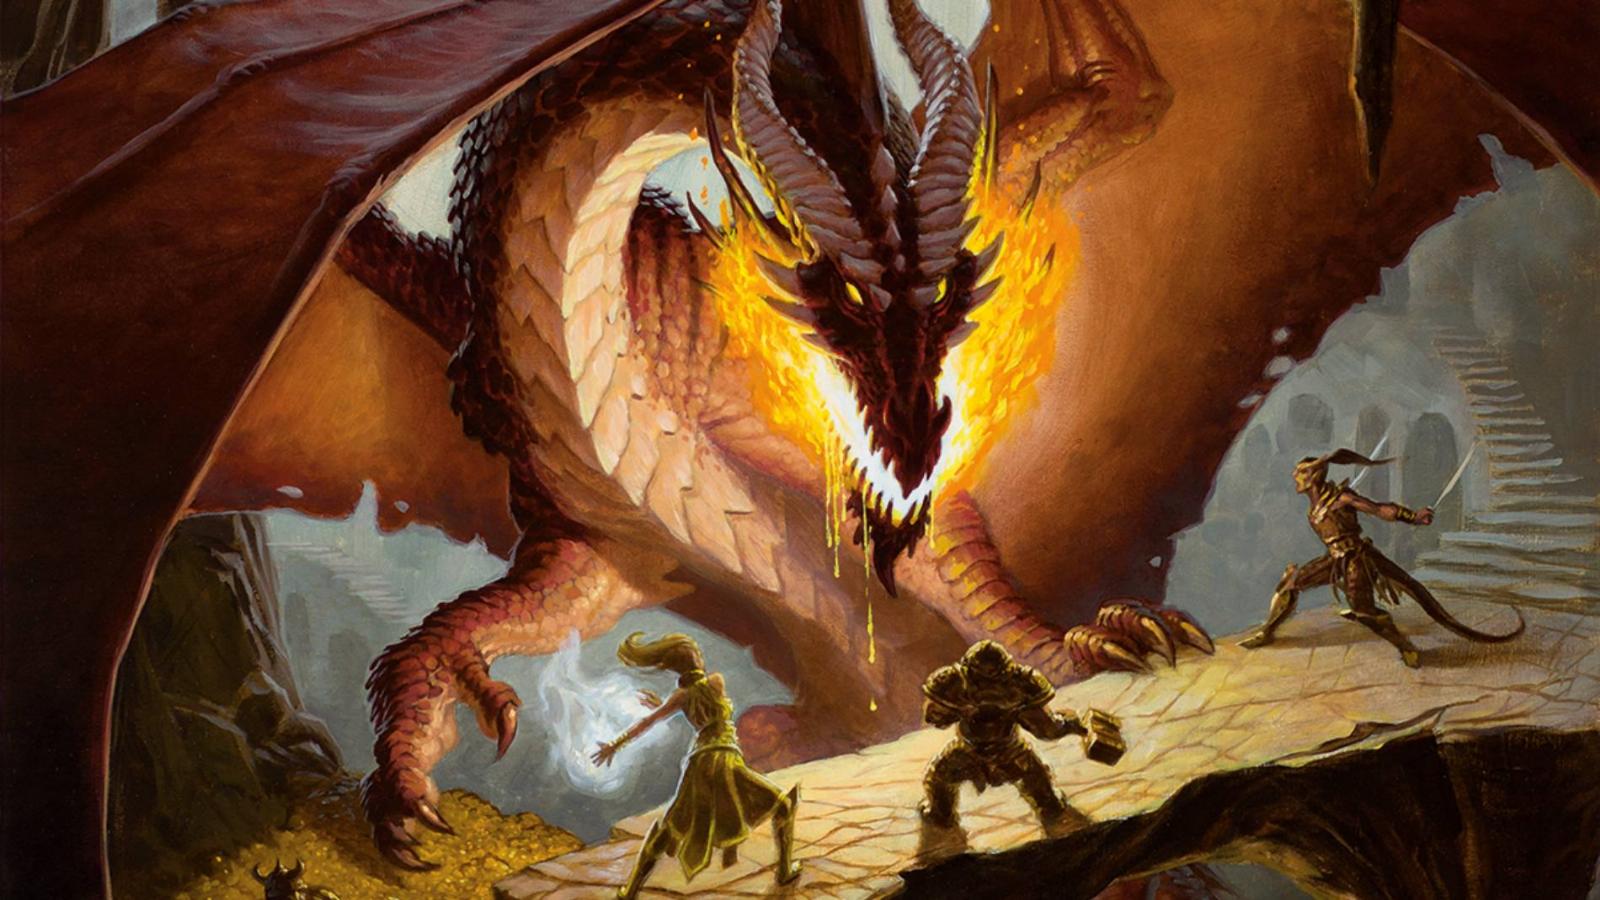 Dungeons & Dragons’ publisher will put the game under a Creative Commons license